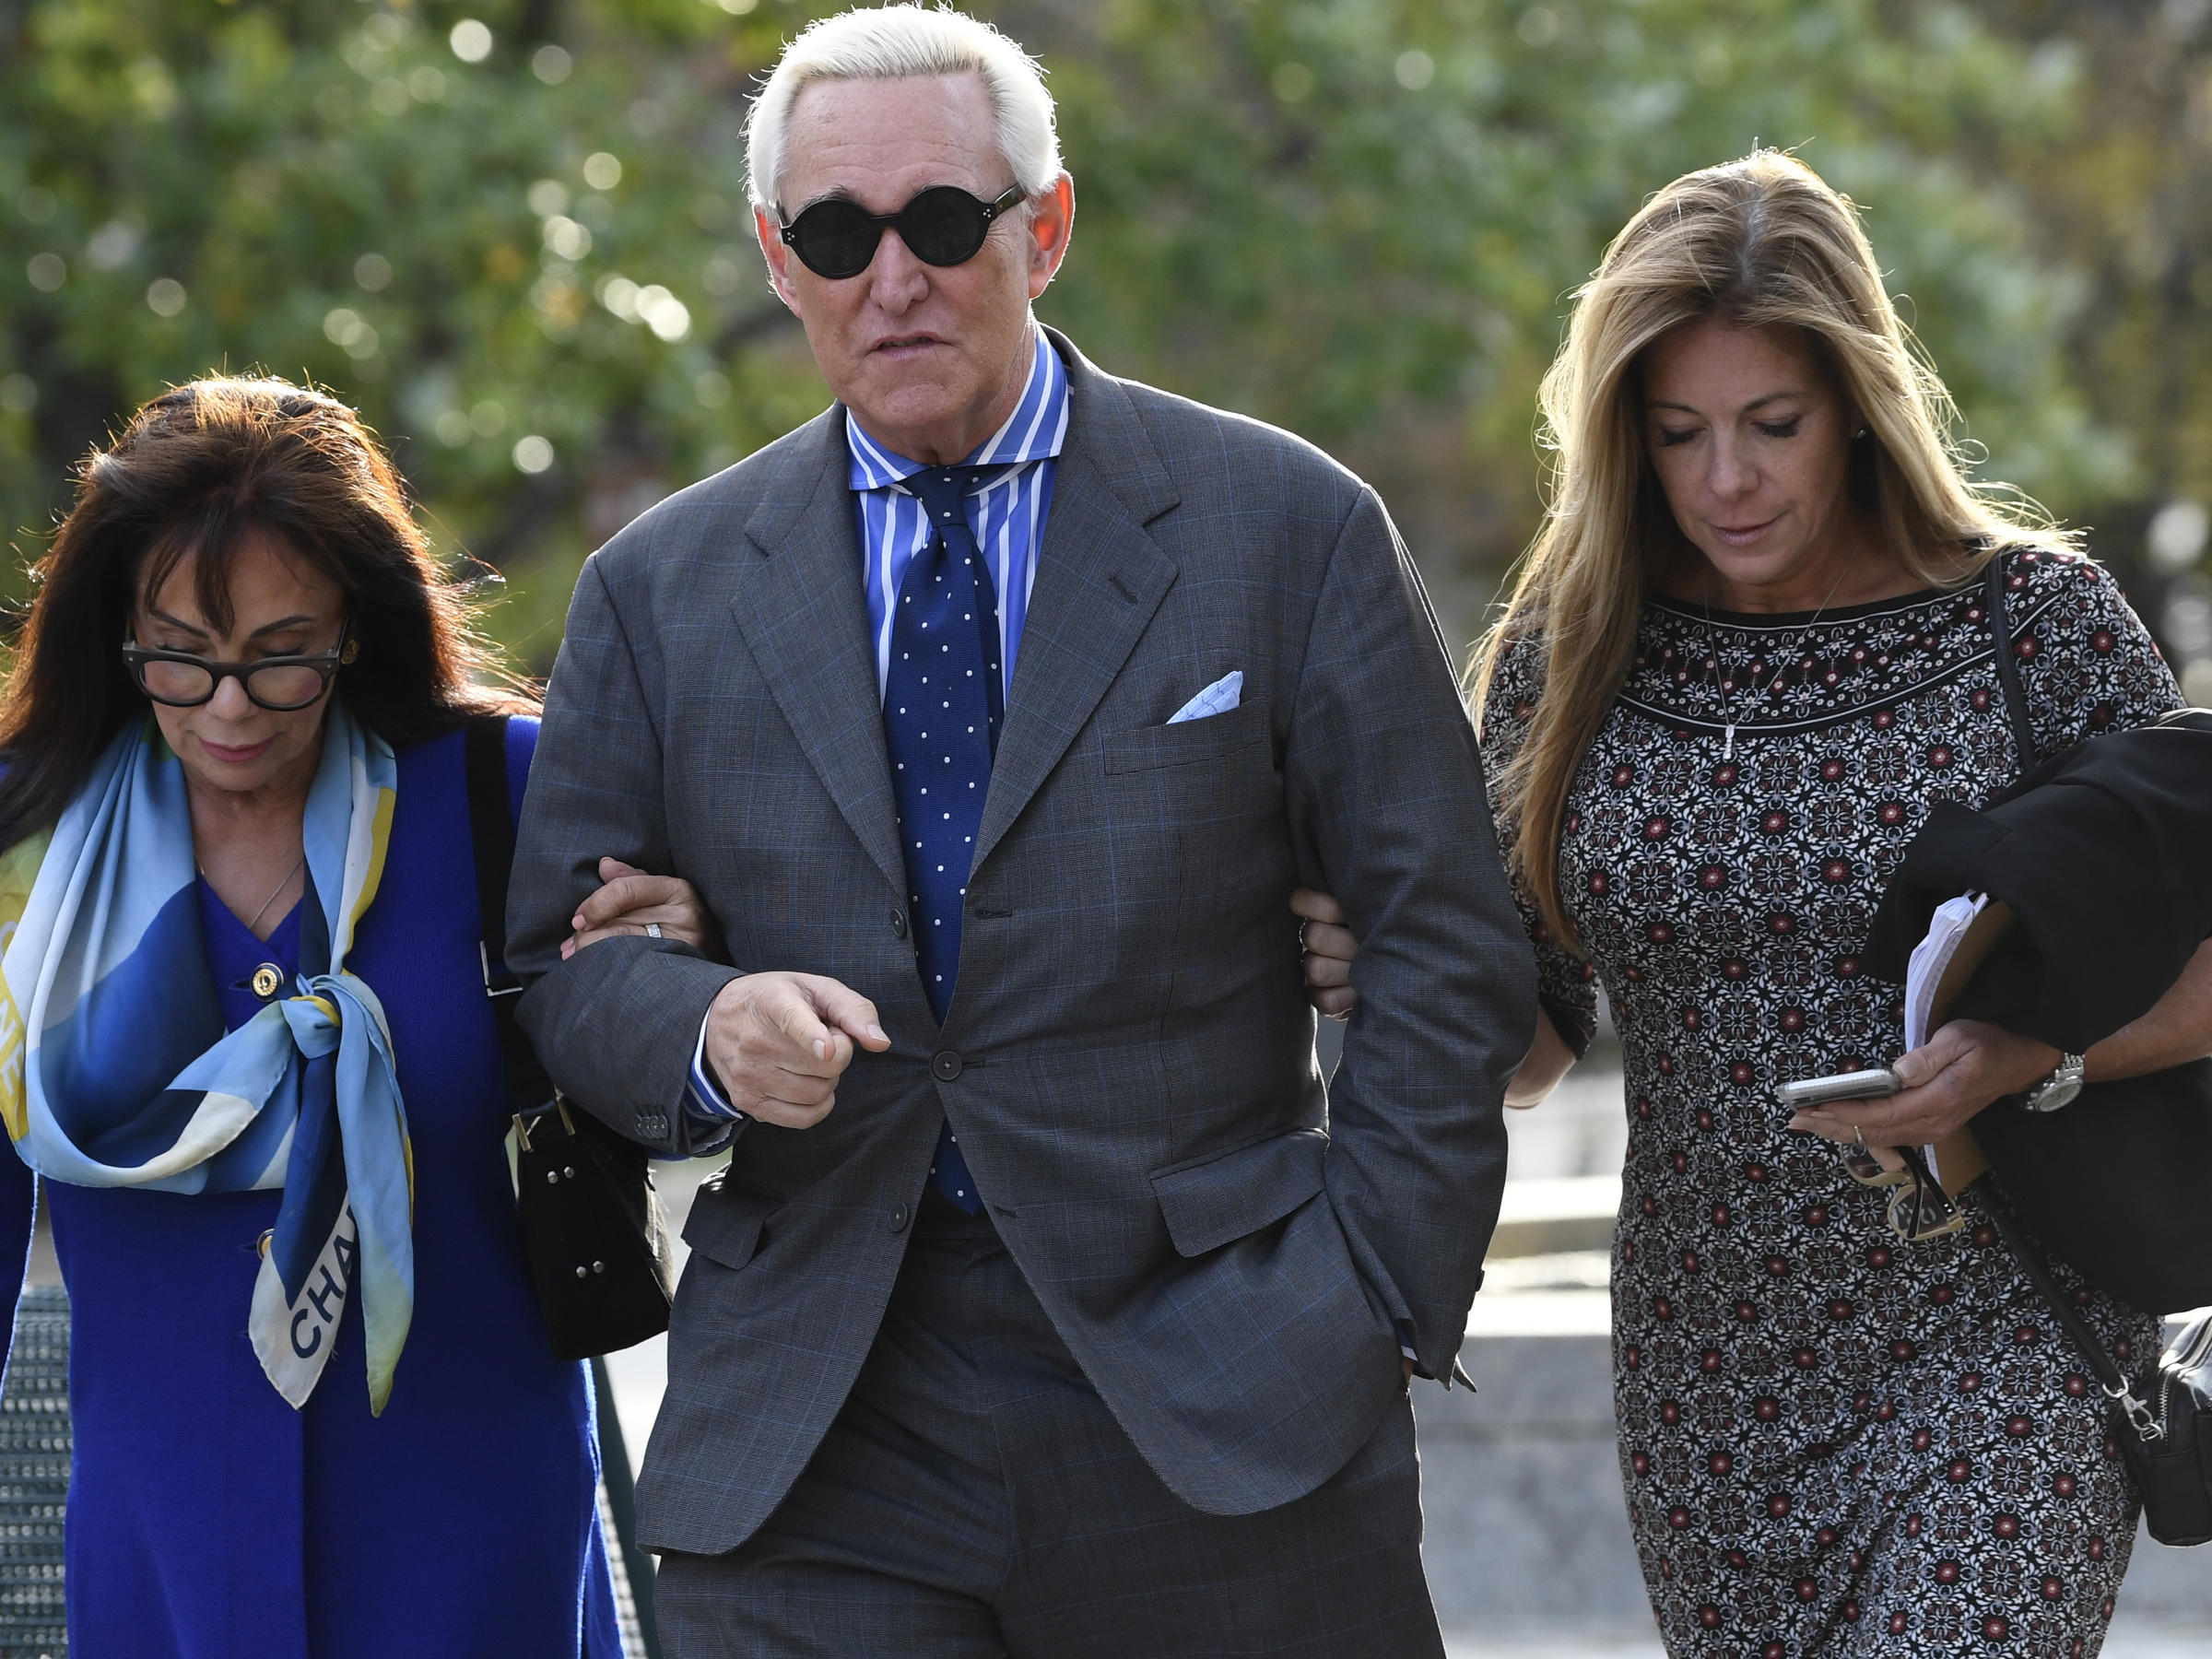 Roger Stone Political Operative And Trump Aide Guilty In False Statements Trial Wuwm